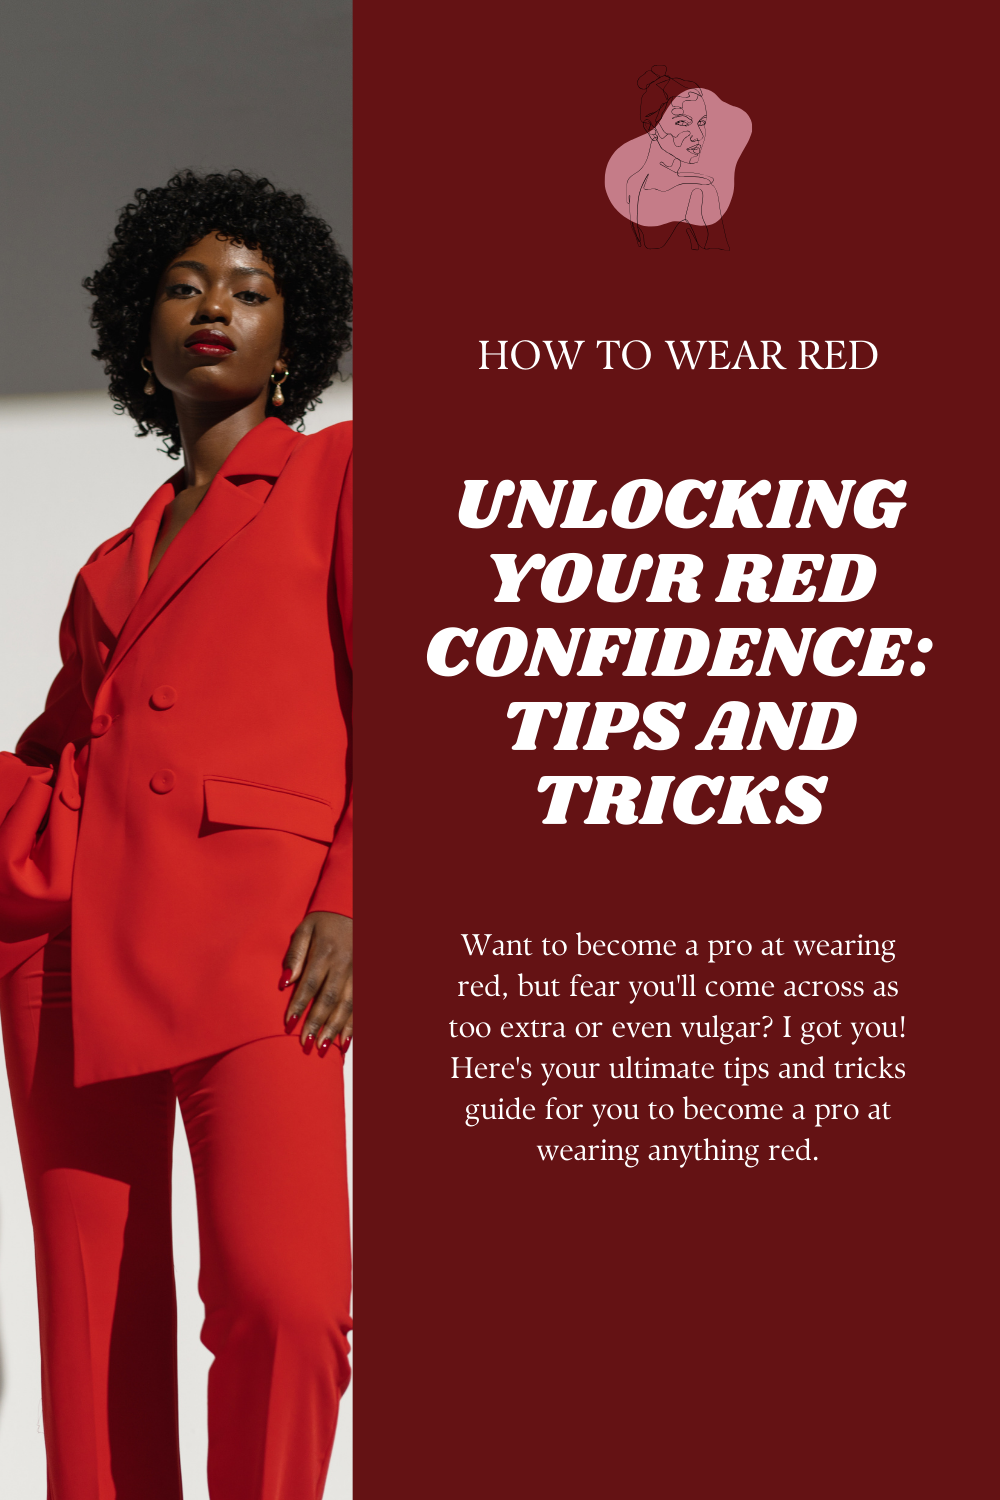 Unlocking Your Red Confidence: Tips and Tricks | How To Wear Red